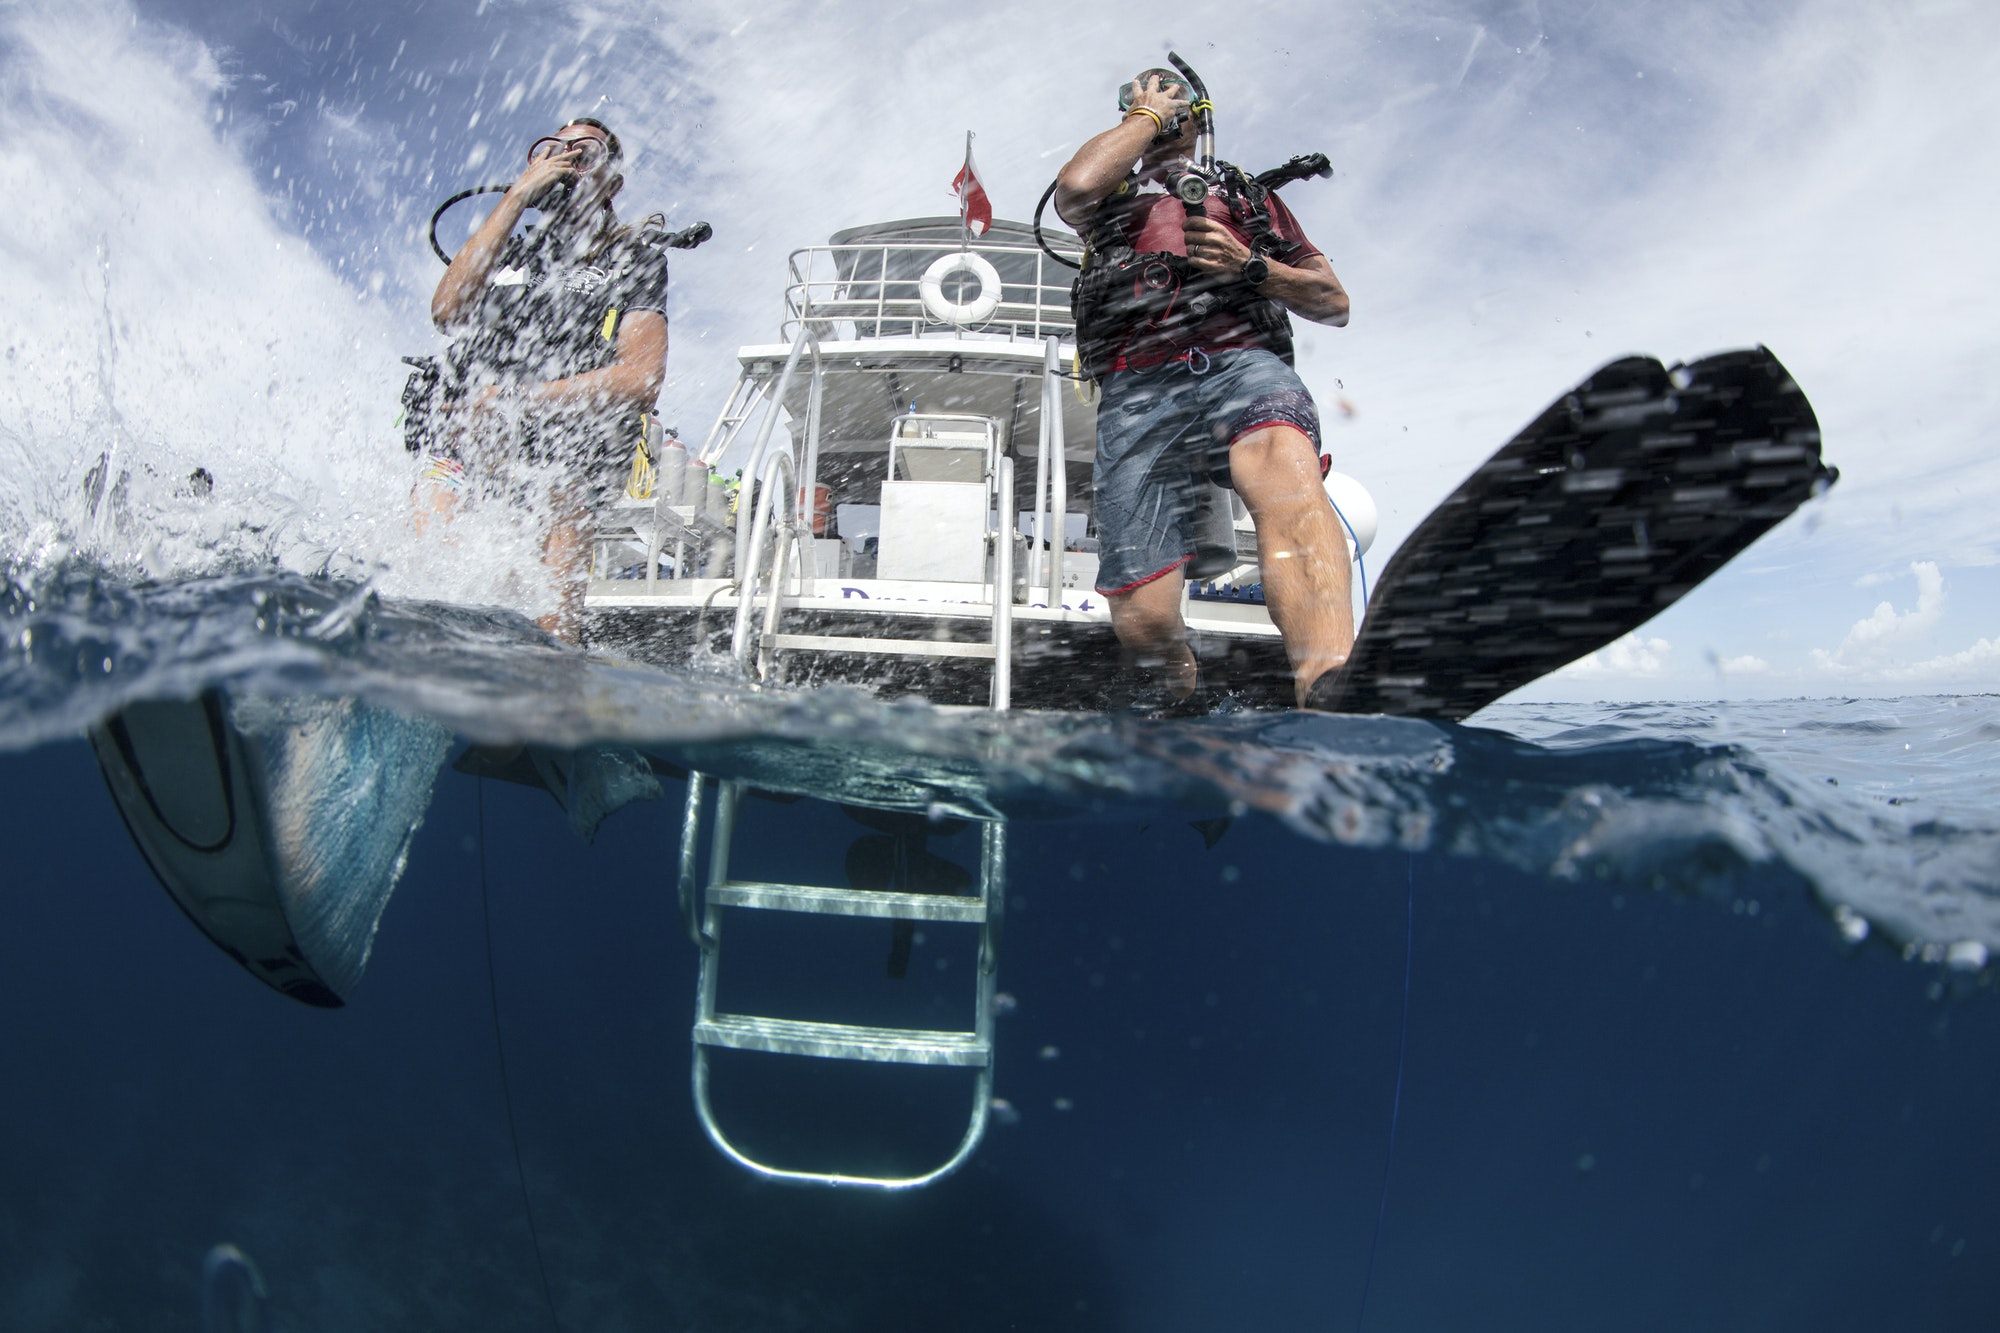 Scuba divers enter water taking a giant stride.